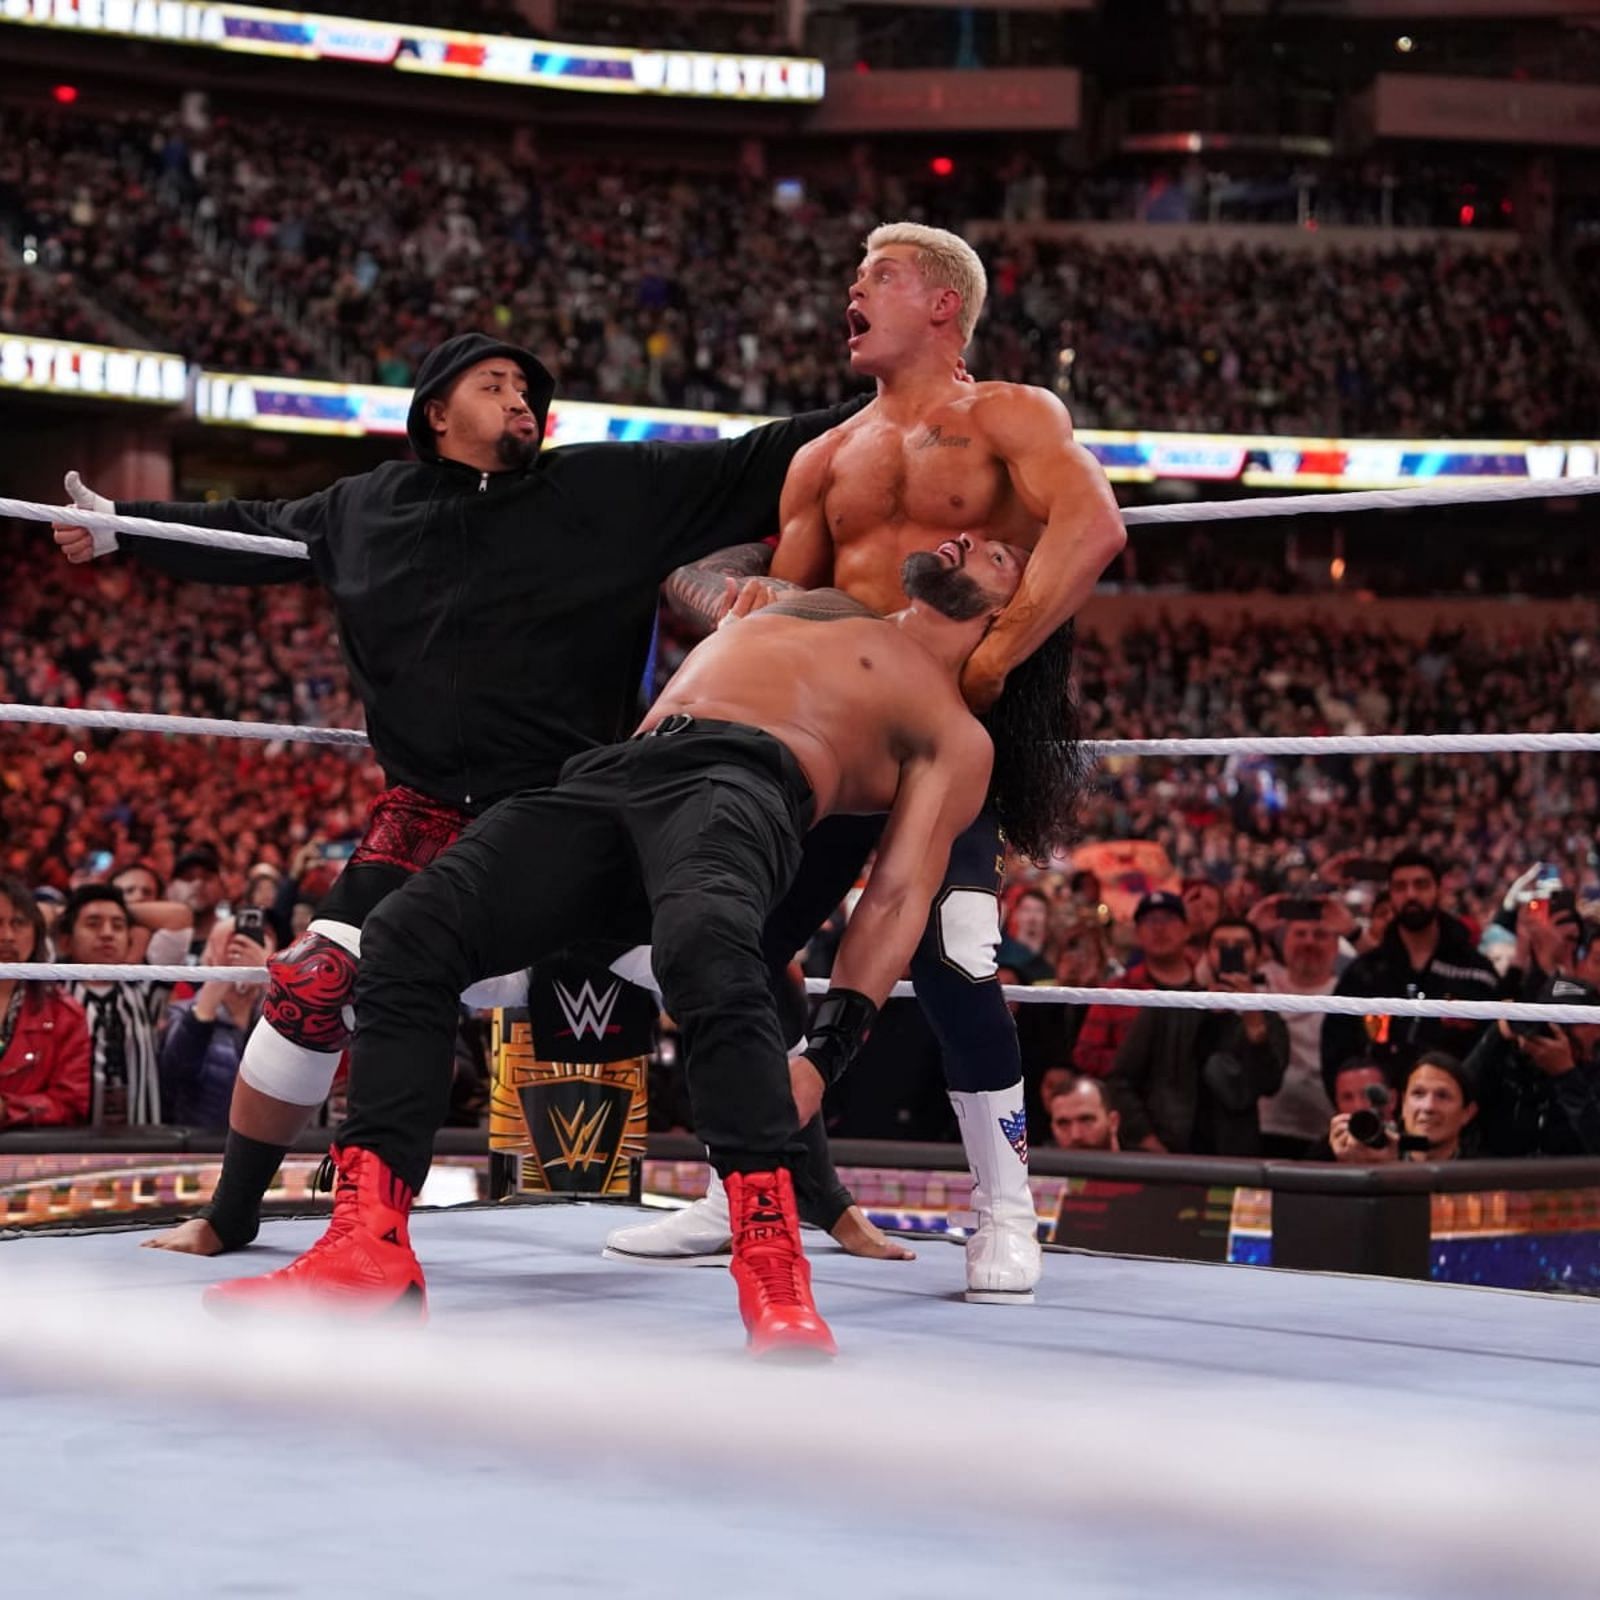 Sikoa paid dividends for The Tribal Chief at WrestleMania 39.